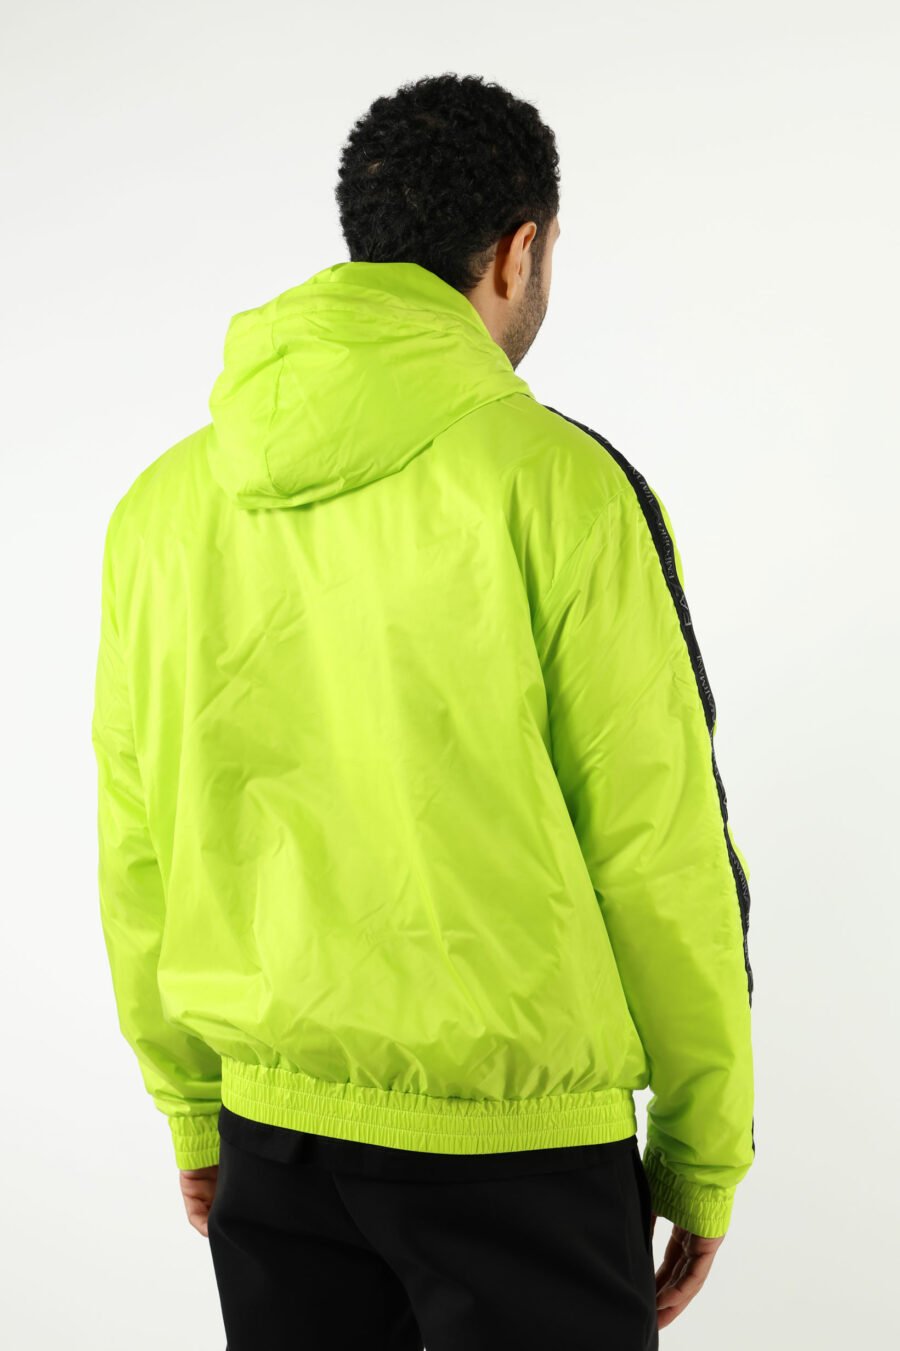 Lime green waterproof jacket with hood, white side lines and "lux identity" logo - 110970